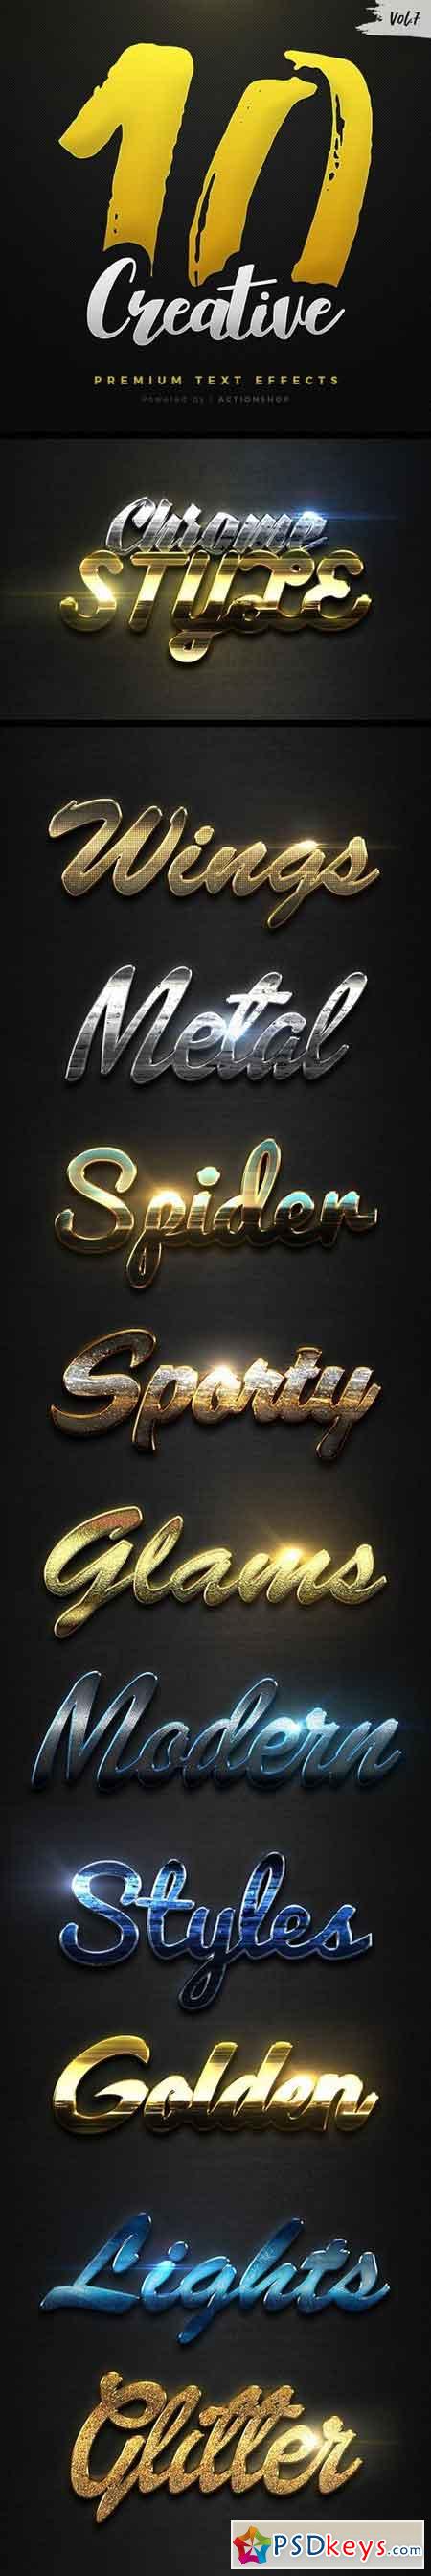 10 Creative Text Effects Vol.7 21096707